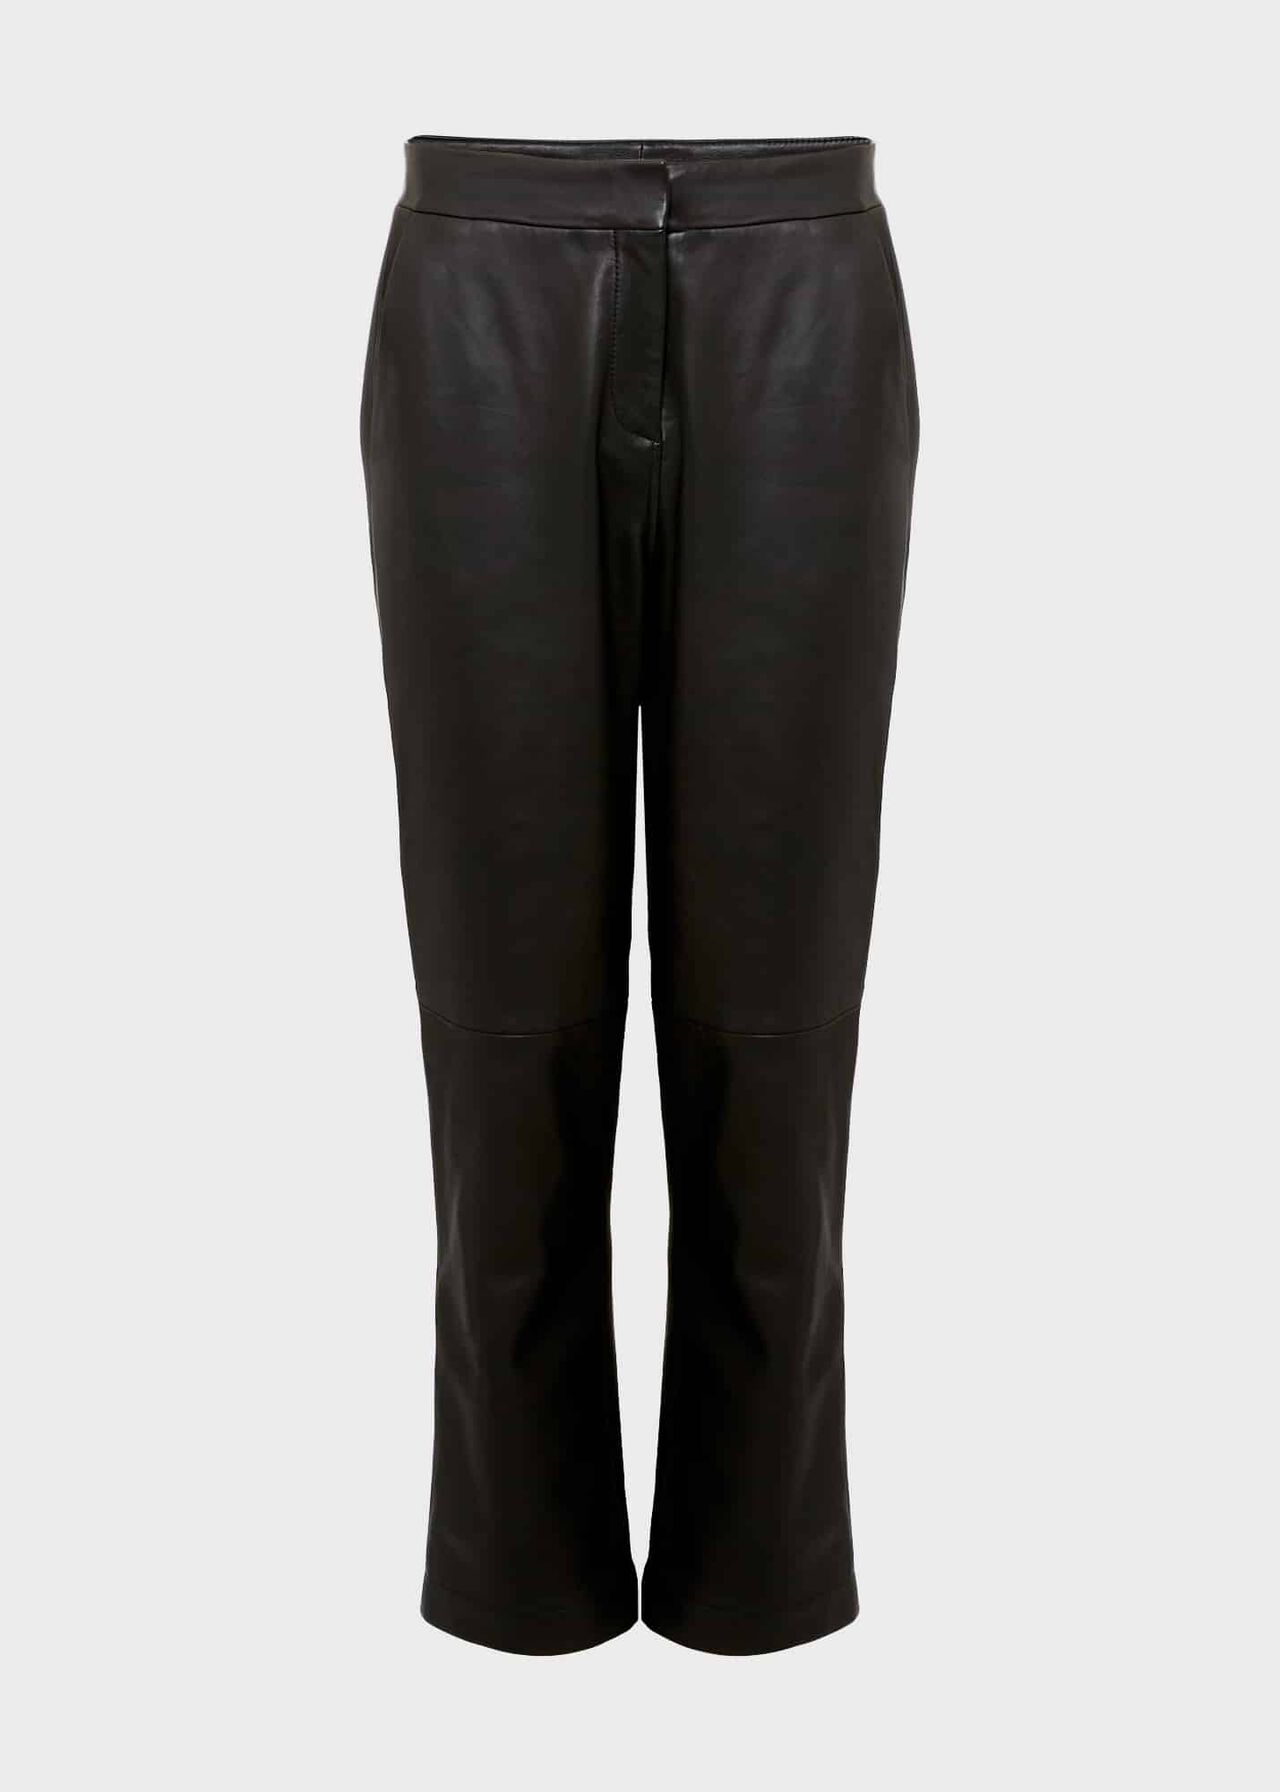 Kinsey Leather Trousers, Black, hi-res